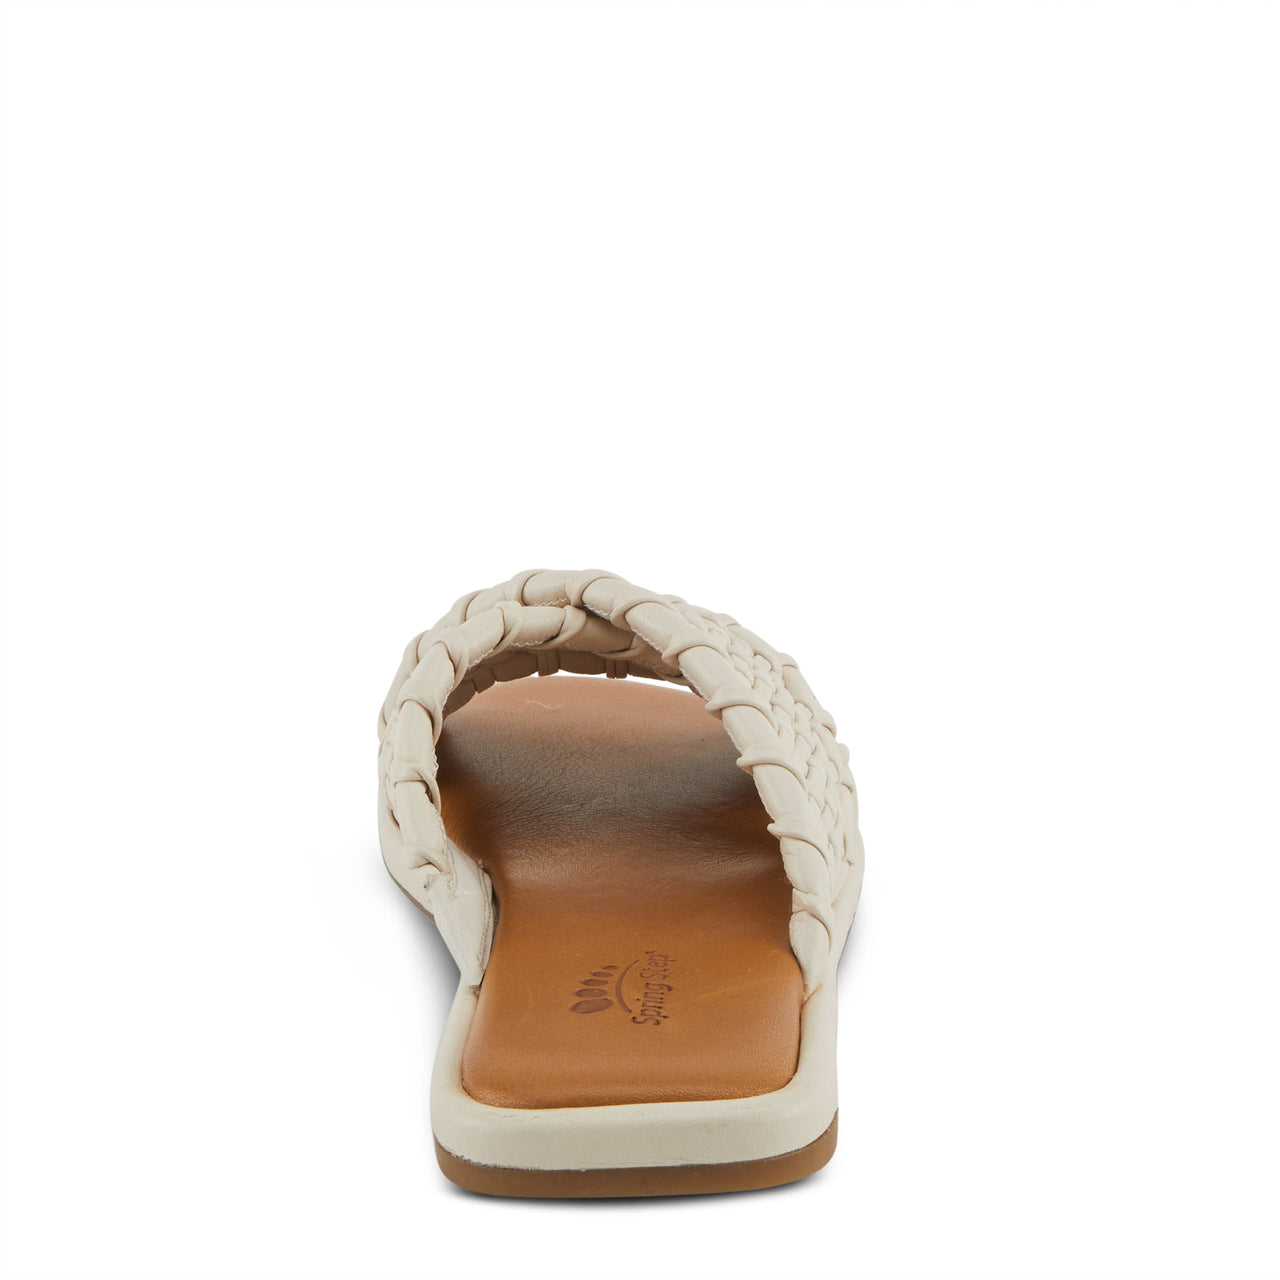 A pair of comfortable and stylish Spring Step Montauk sandals in brown leather